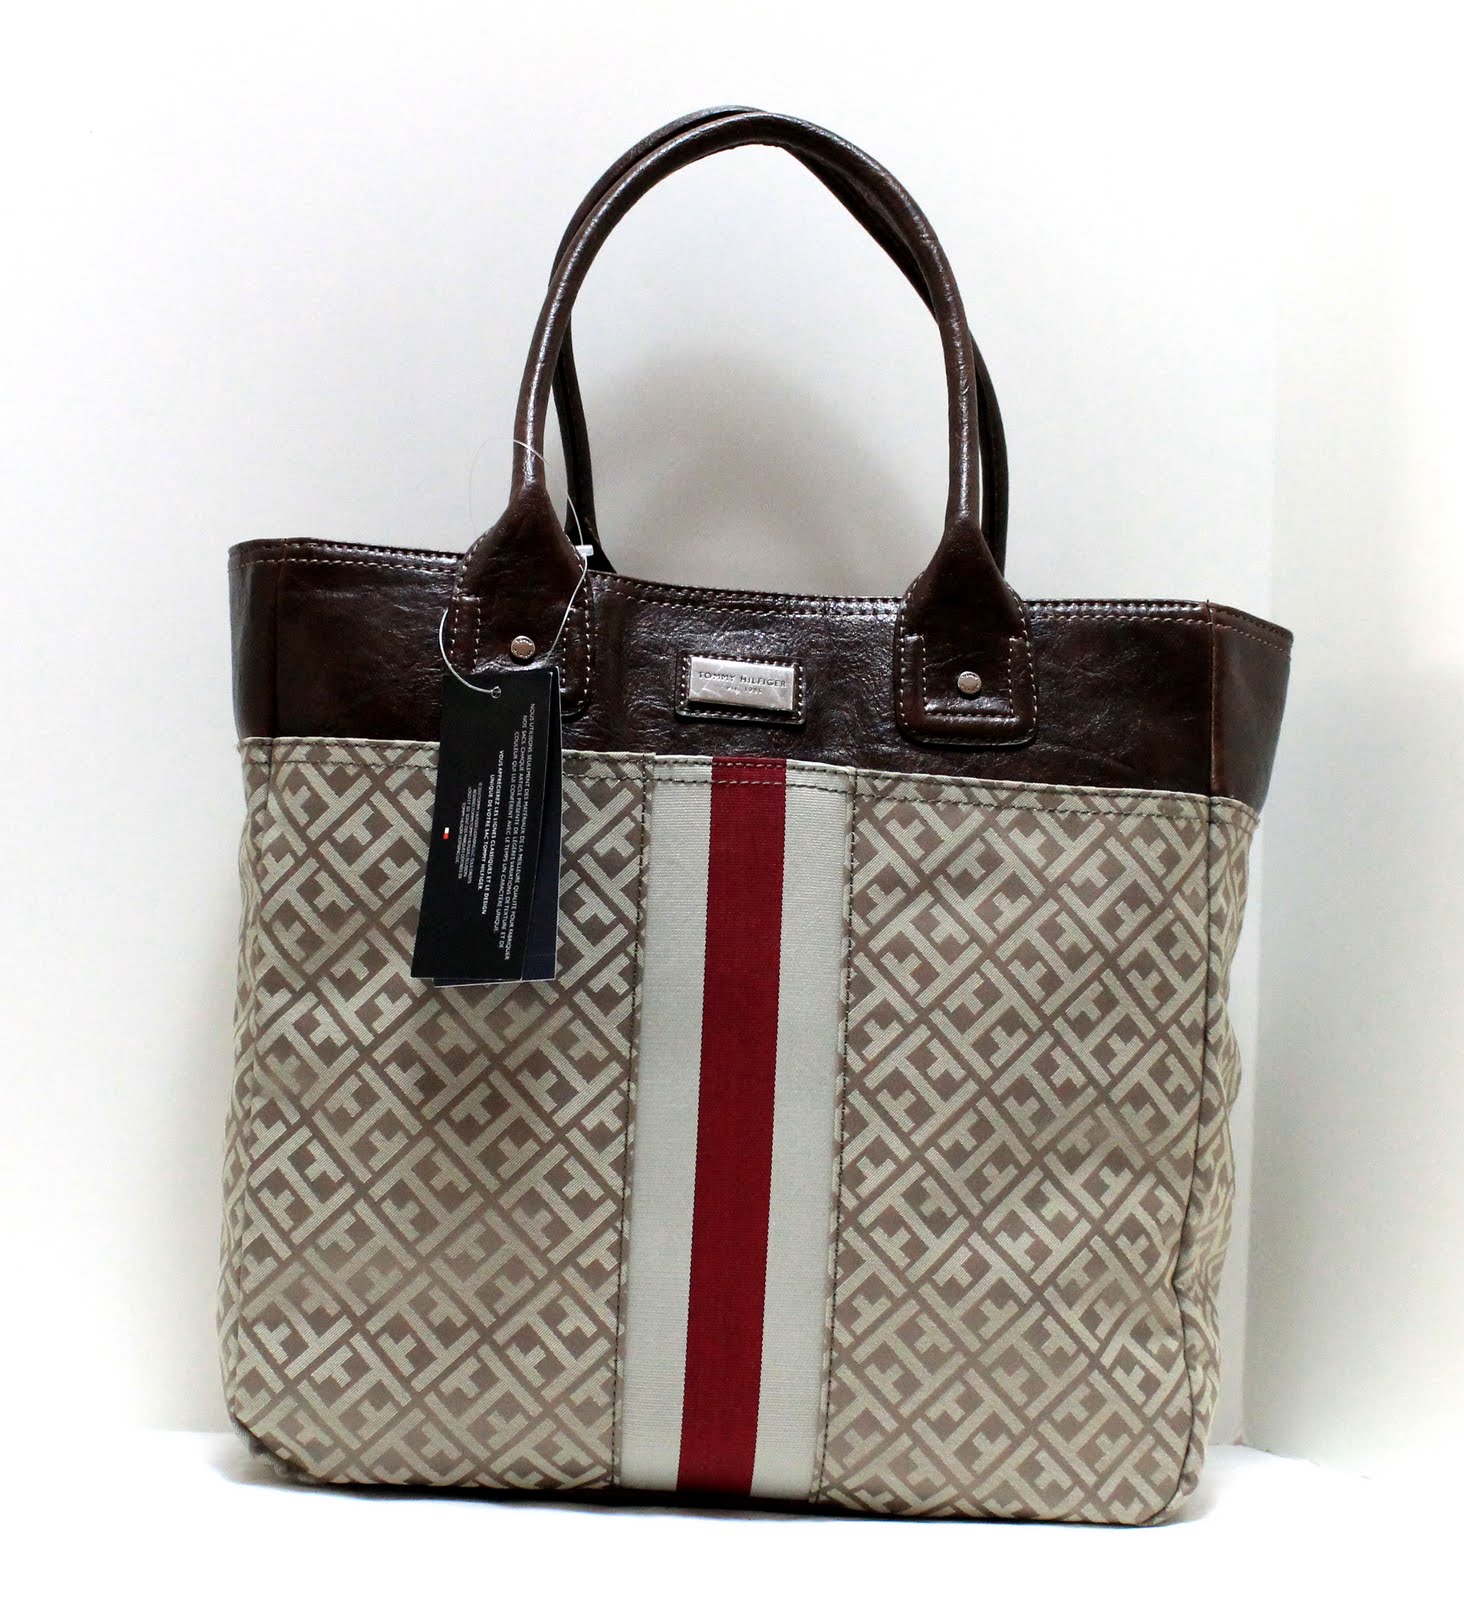 Boutique Malaysia: TOMMY HILFIGER TOTE